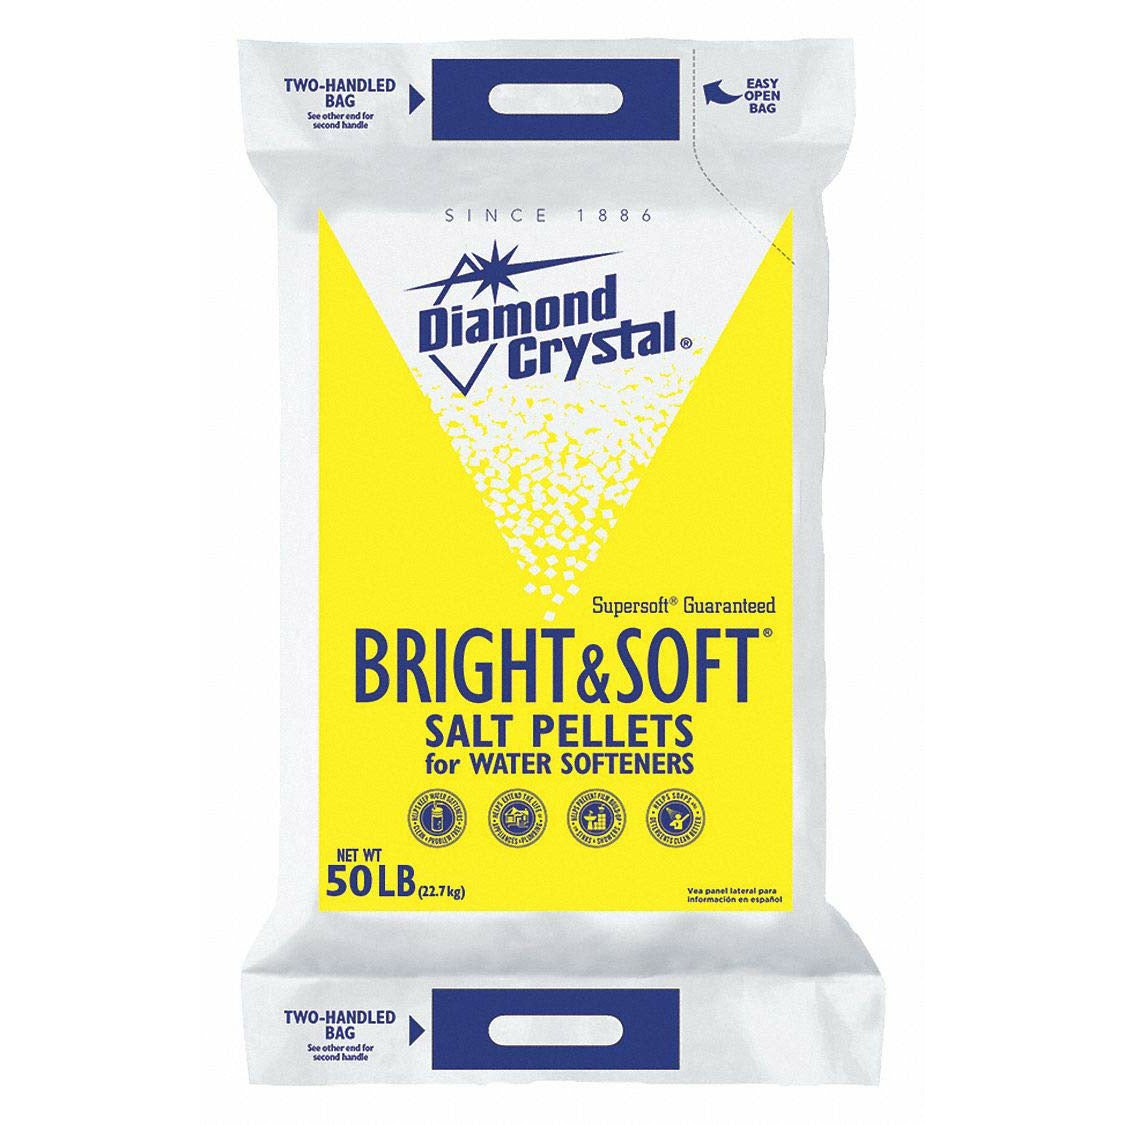 Diamond Crystal Water Softener Pellets, 50 lbs, 6 Bags.  Delivered FREE to any San Antonio address